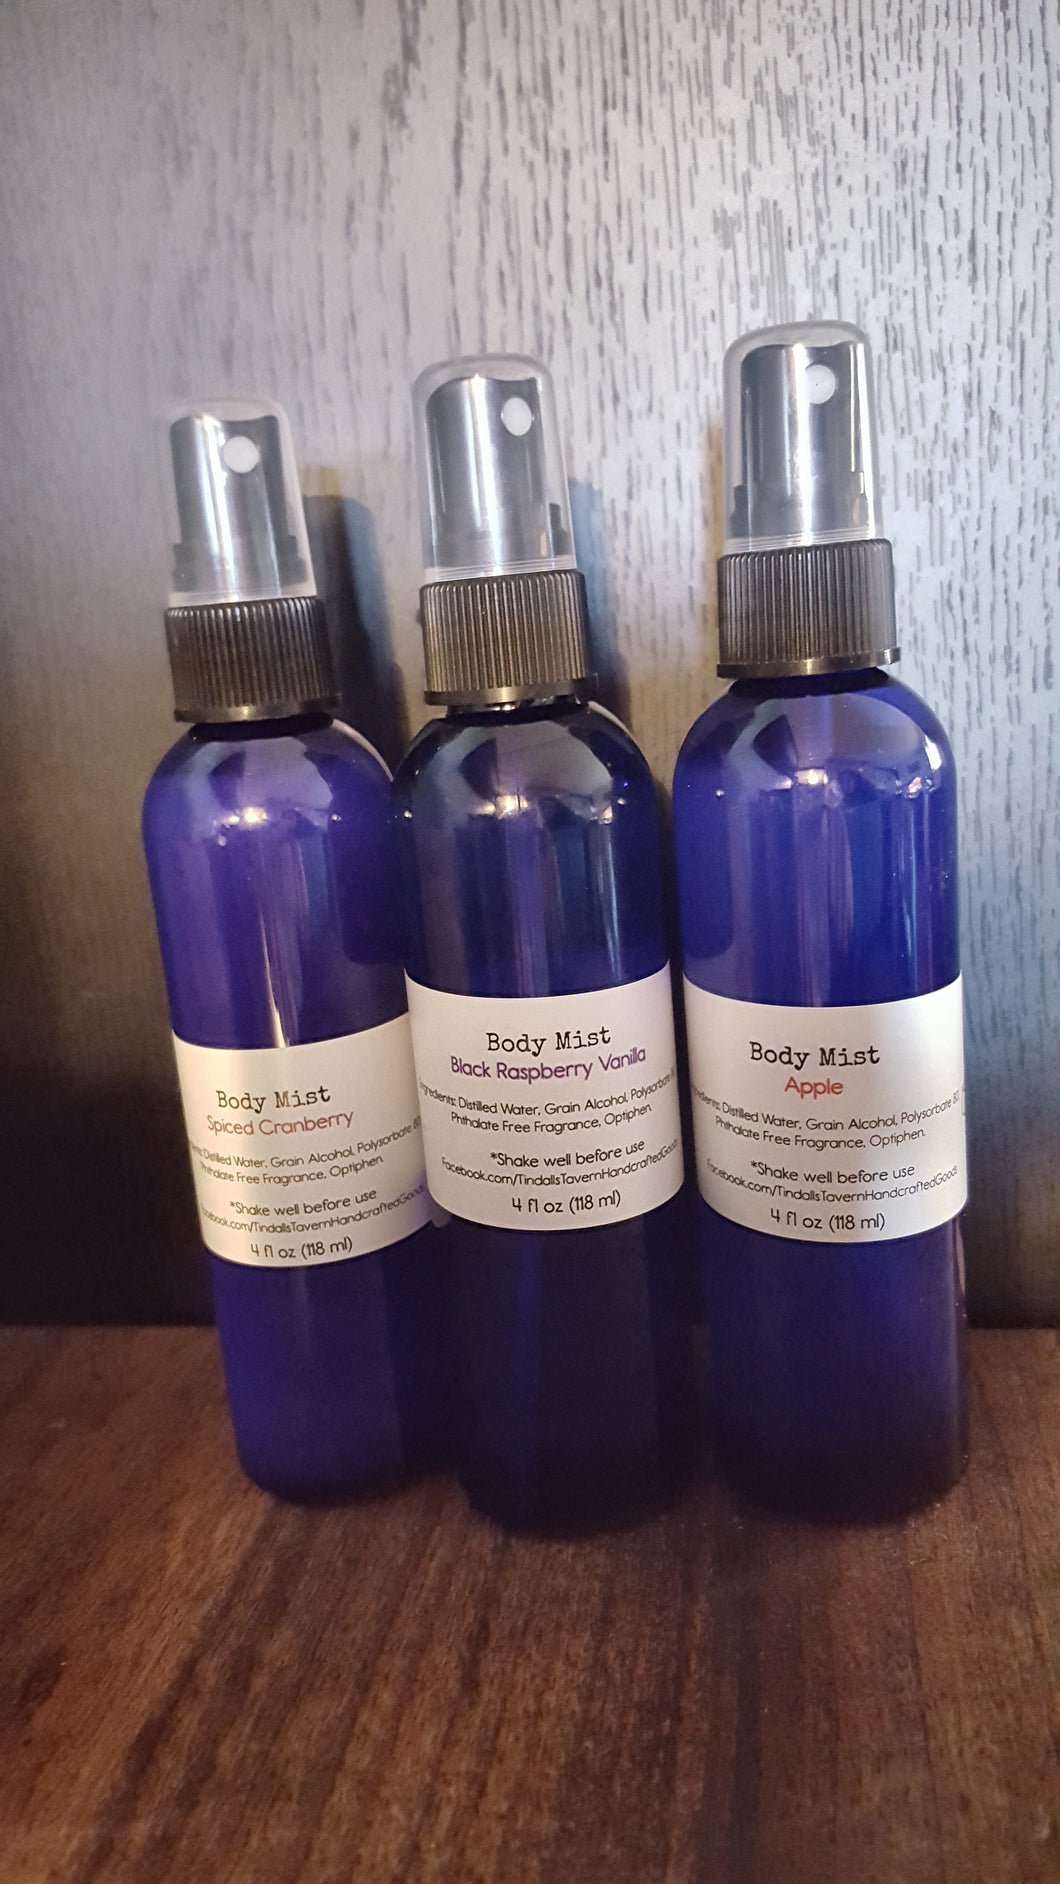 Three body mists in a 4 oz blue bottle with spray top.  Pictured are Cranberry, Black Raspberry Vanilla and Apple.